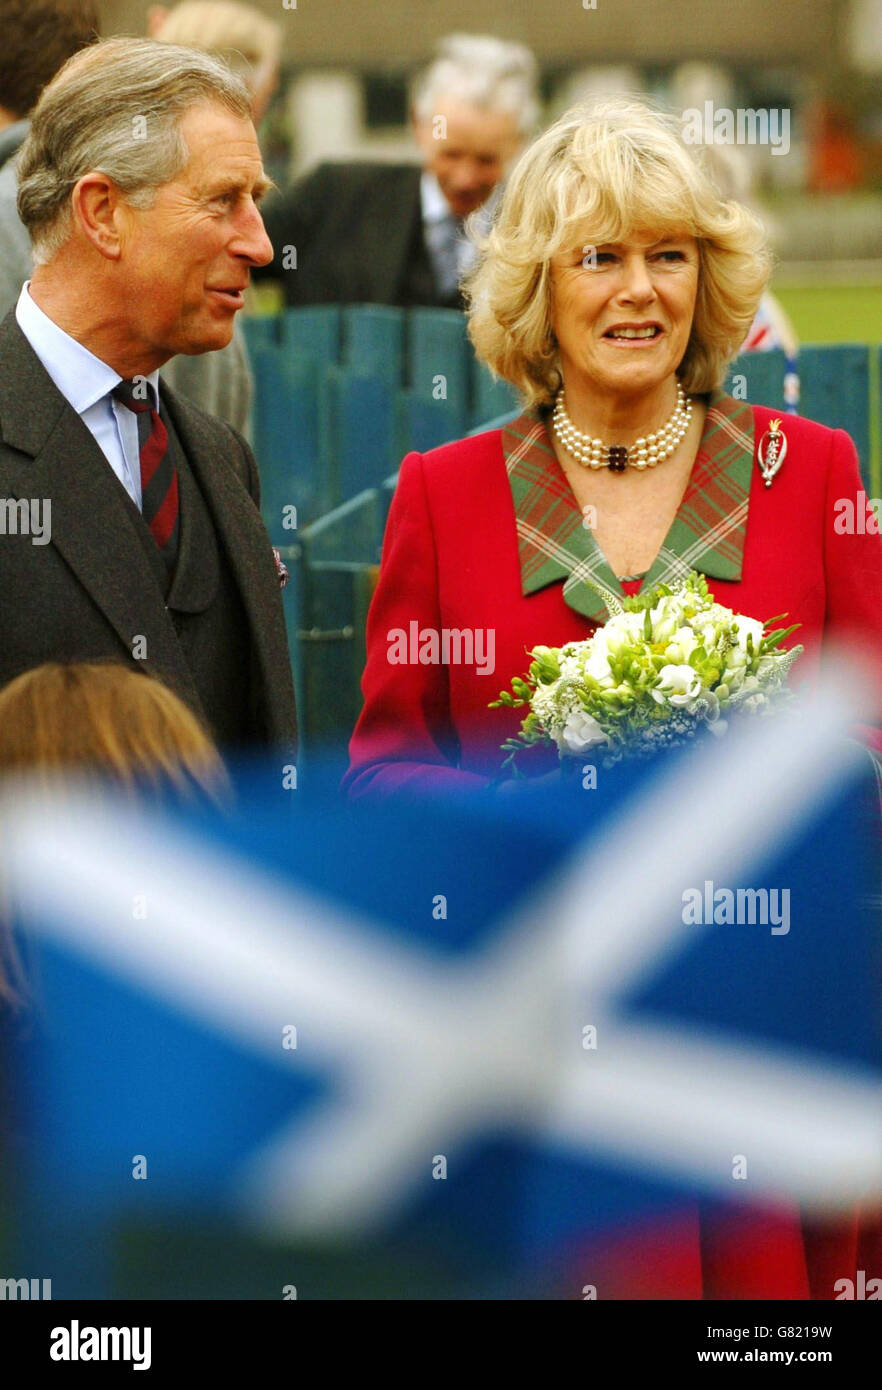 The Prince of Wales and the Duchess of Cornwall during the opening of a new play par. It was the first official duty for the honeymooning couple - known as the Duke and Duchess of Rothesay when in Scotland - since their wedding. Stock Photo